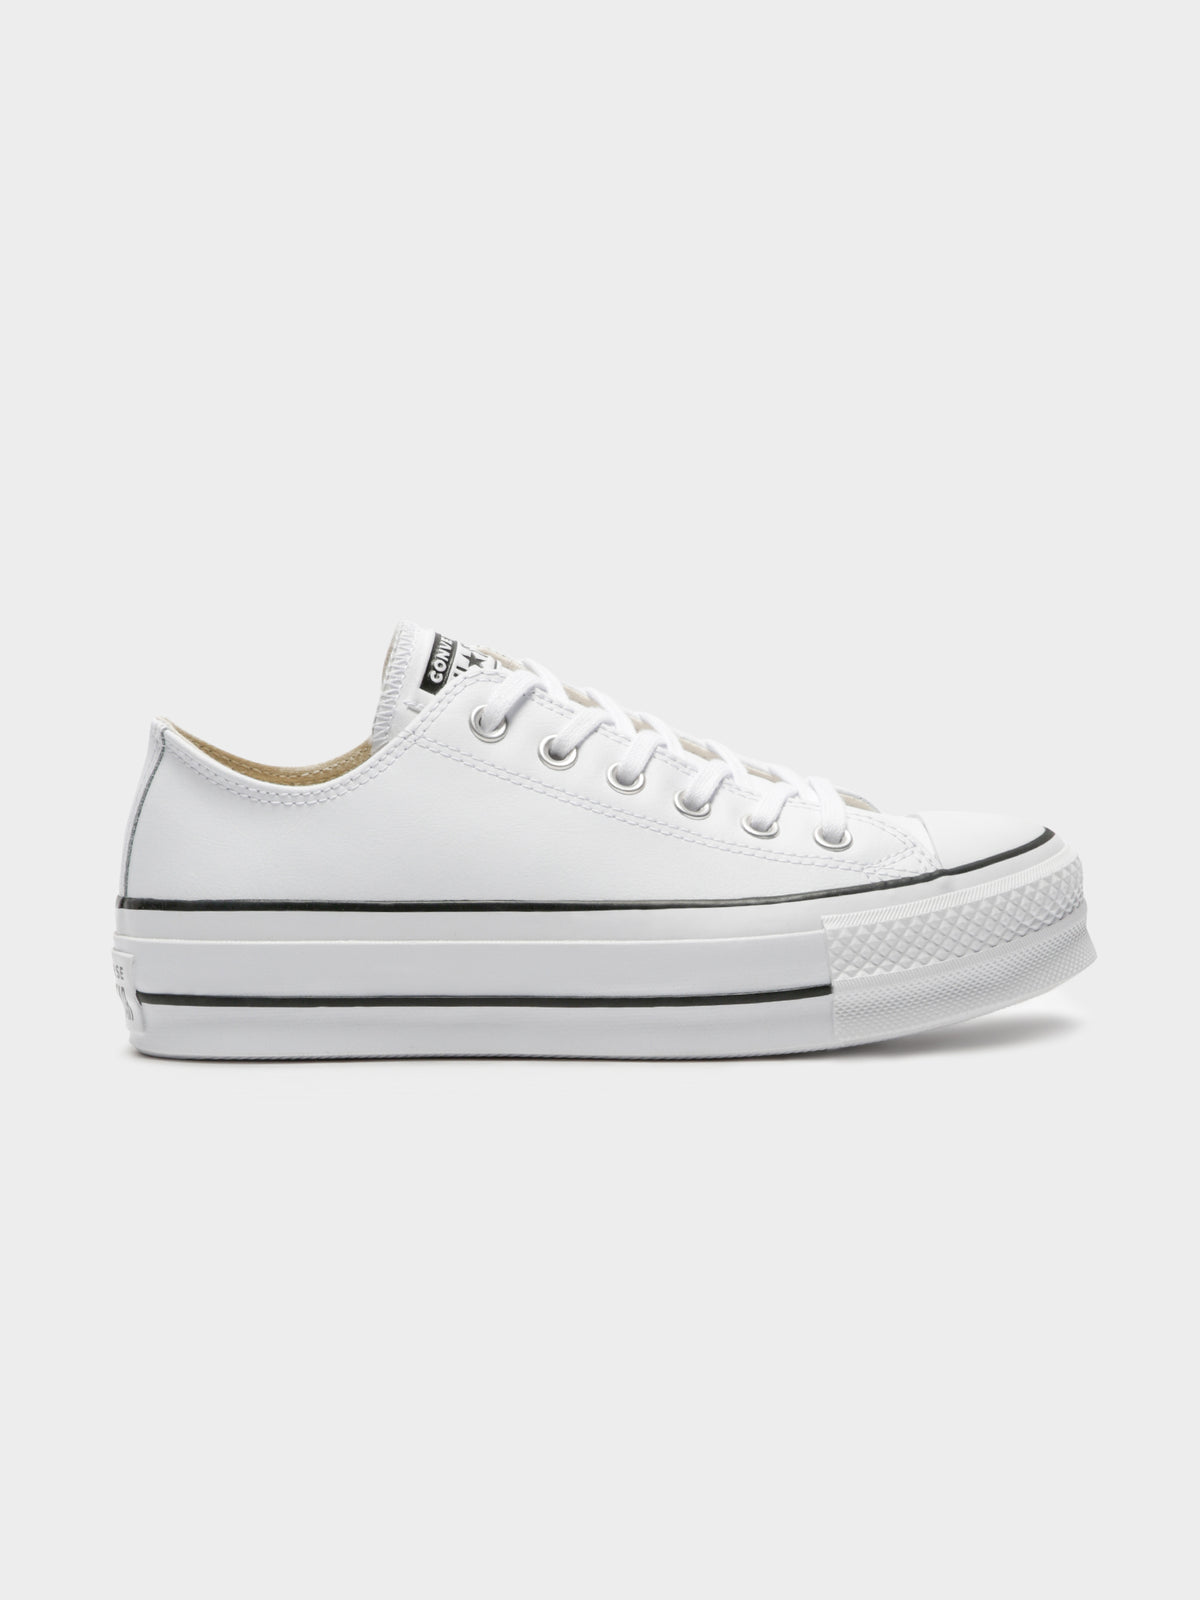 Womens Chuck Taylor All Star Leather Platform Sneakers in White &amp; Black